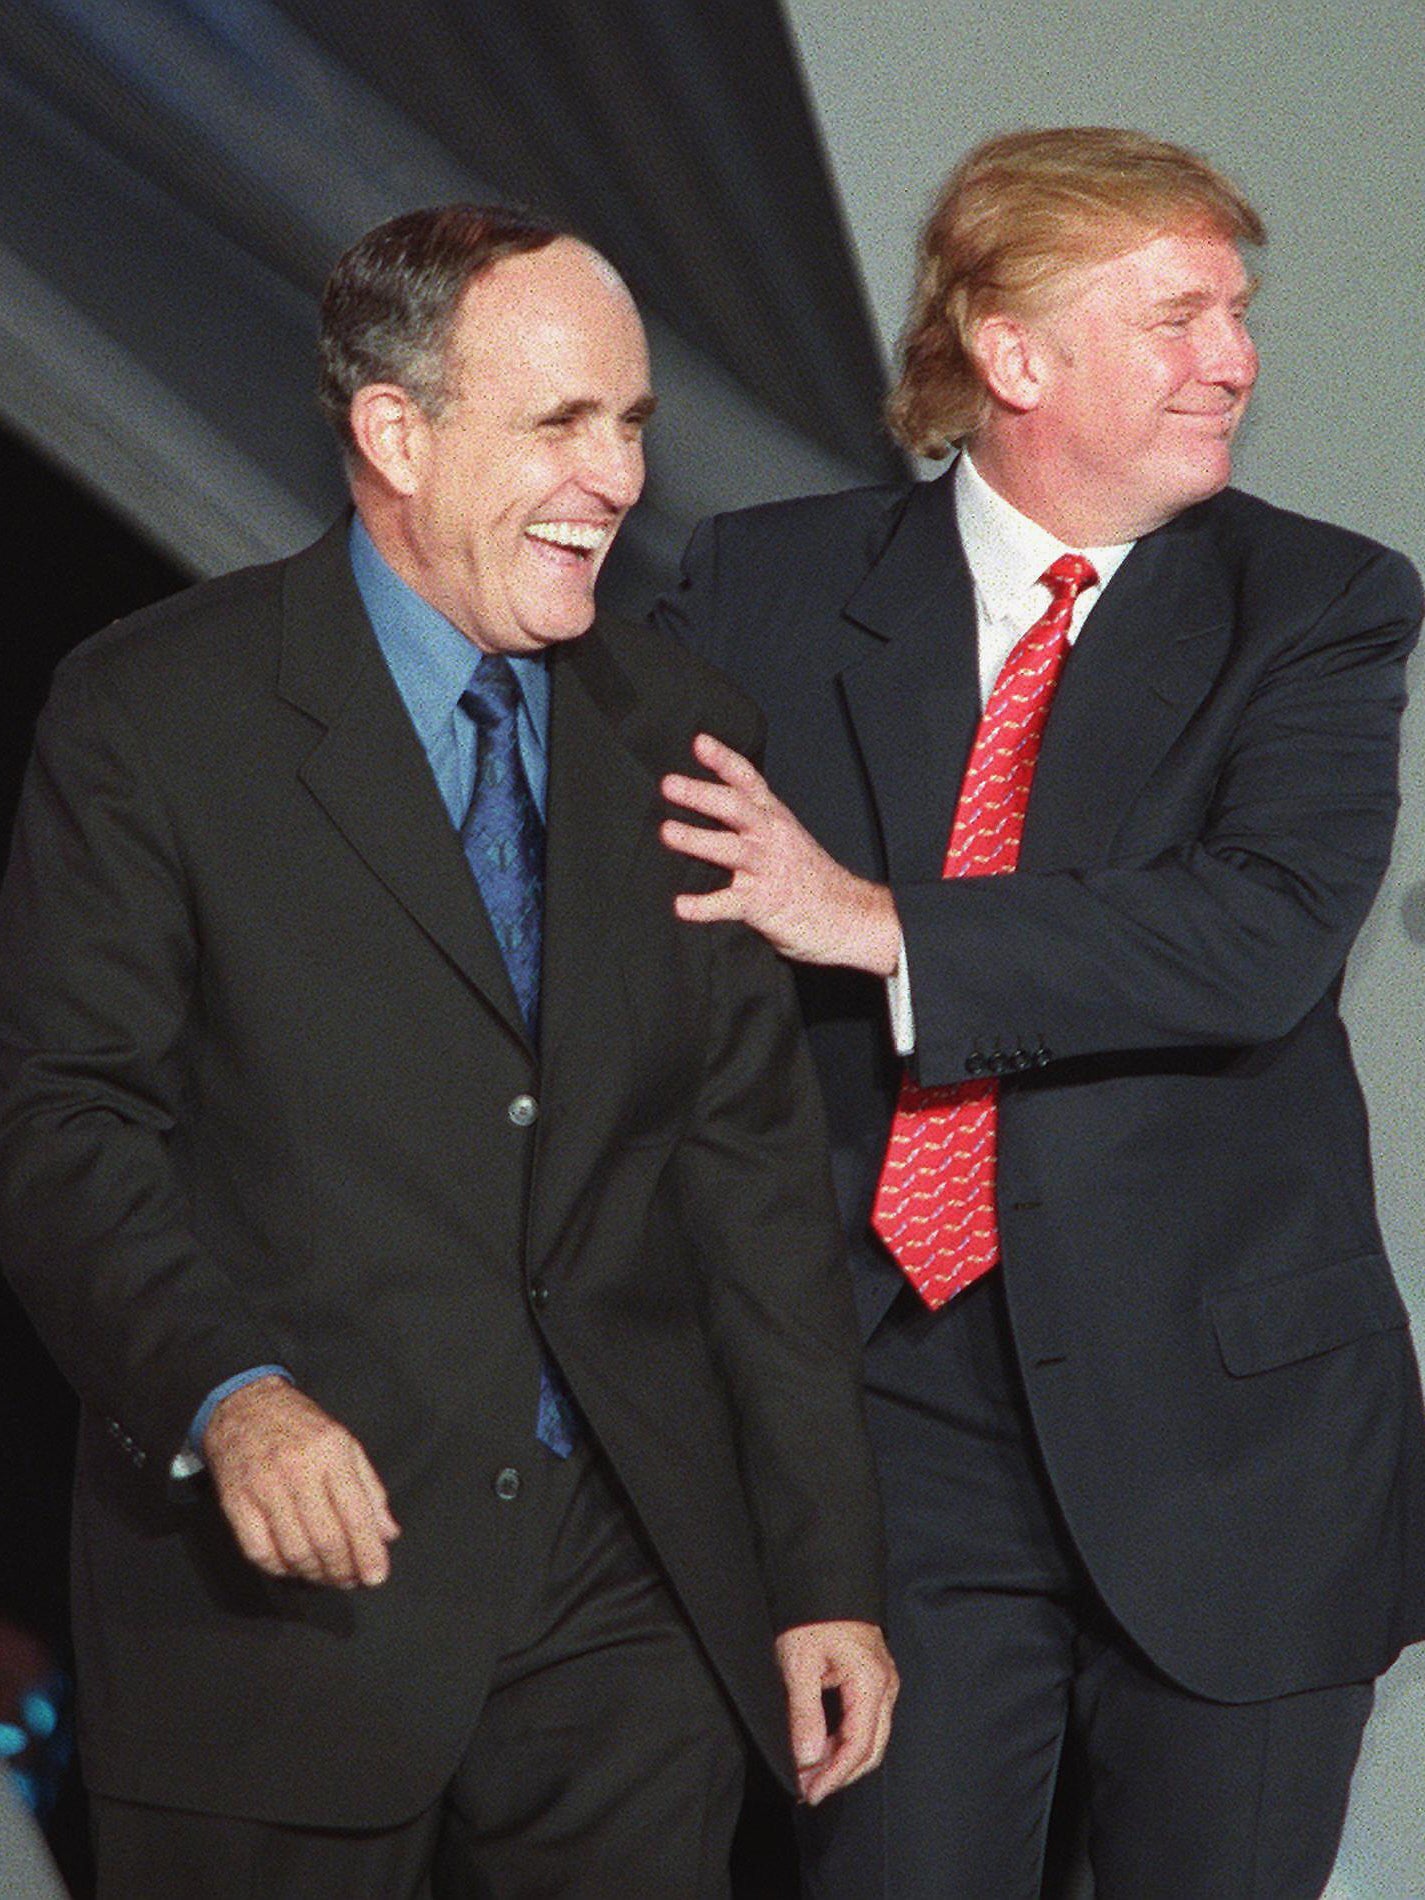 The terrible twosome: Giuliani and Trump walk down the runway during the NYC2000 fashion show